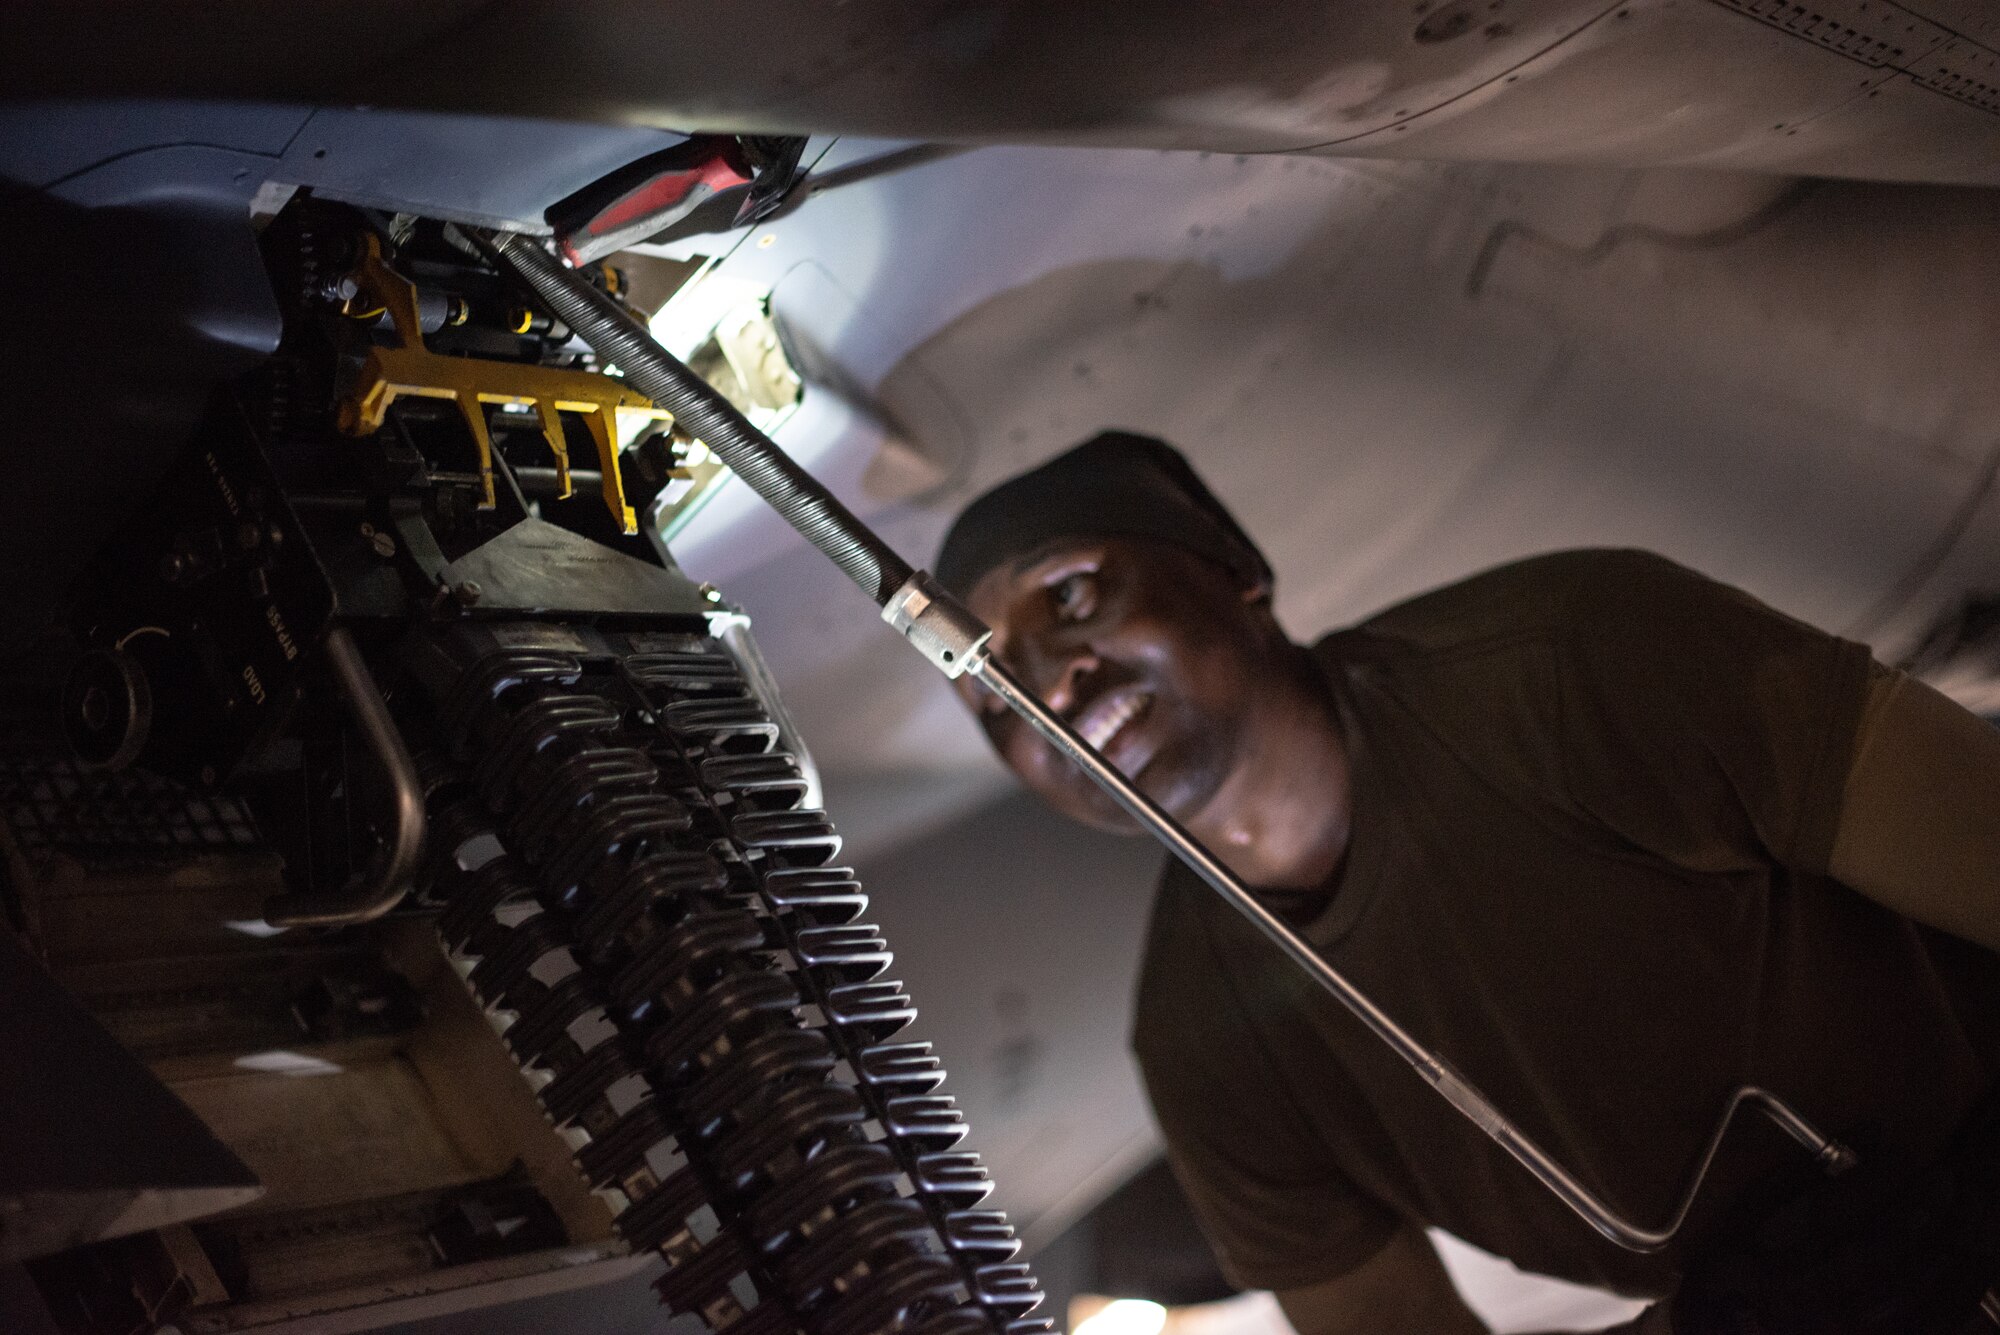 Staff Sgt. Kiefer May, 380th Expeditionary Aircraft Maintenance Squadron weapons load crew team chief, loads an F-15E Strike Eagle with 20mm high-explosive incendiary bullets July 15, 2019, at Al Dhafra Air Base, United Arab Emirates. Weapons load crews work 24/7 operations to support loading and configuring various munitions for the F-35A Lightning II, F-15E Strike Eagle and F-15C Eagle jets at ADAB. (U.S. Air Force photo by Staff Sgt. Chris Thornbury)